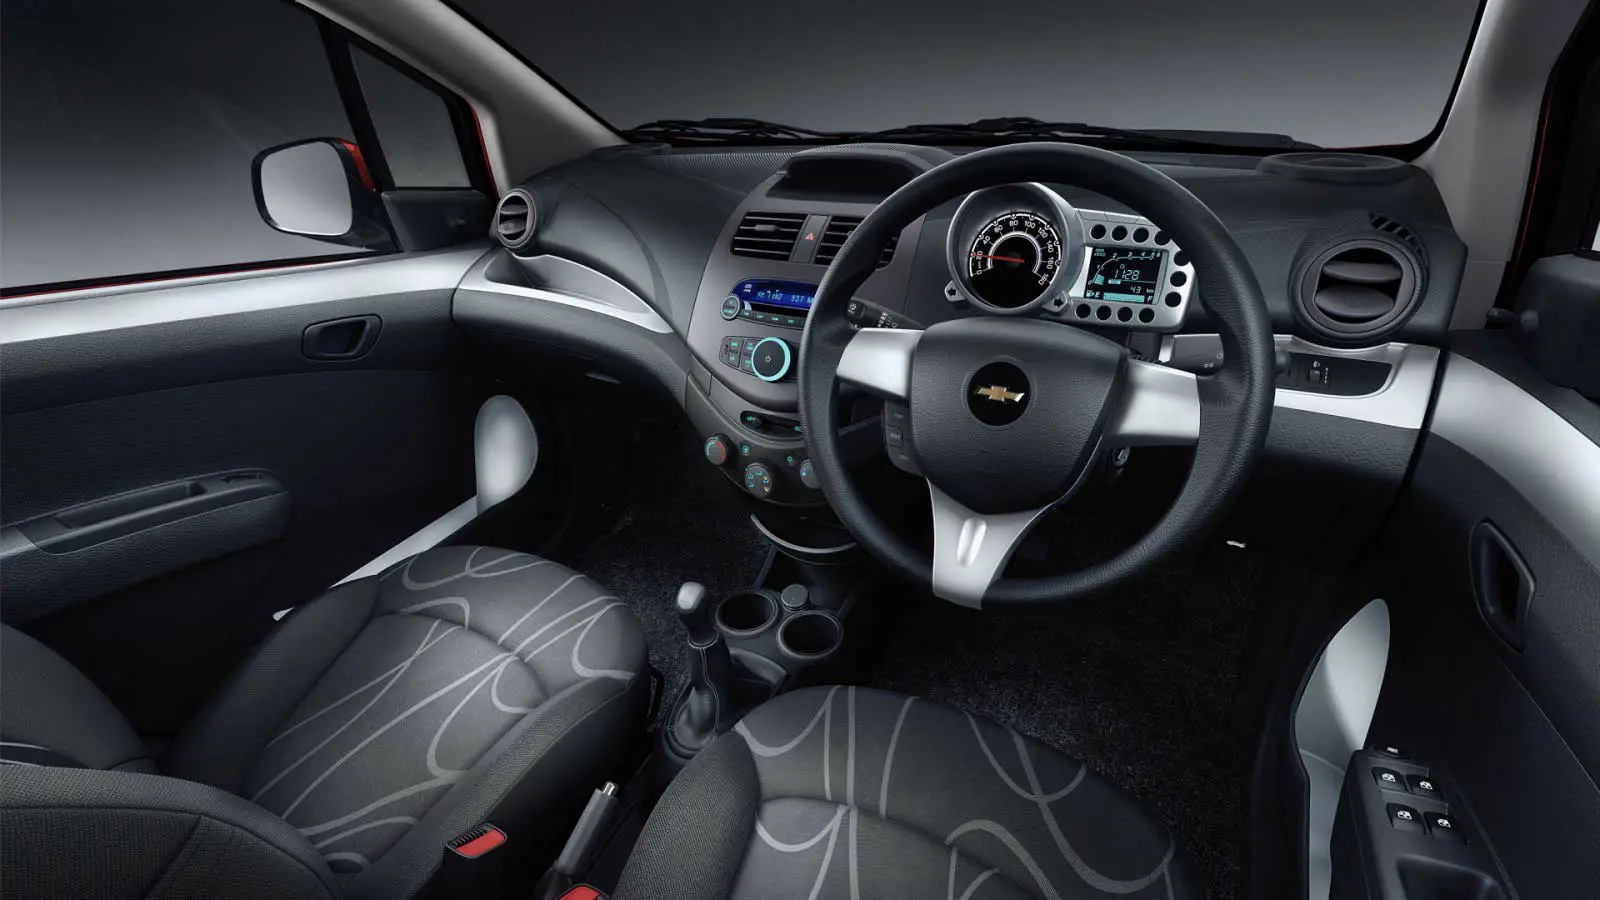 Chevrolet Beat PS Diesel Interior front view